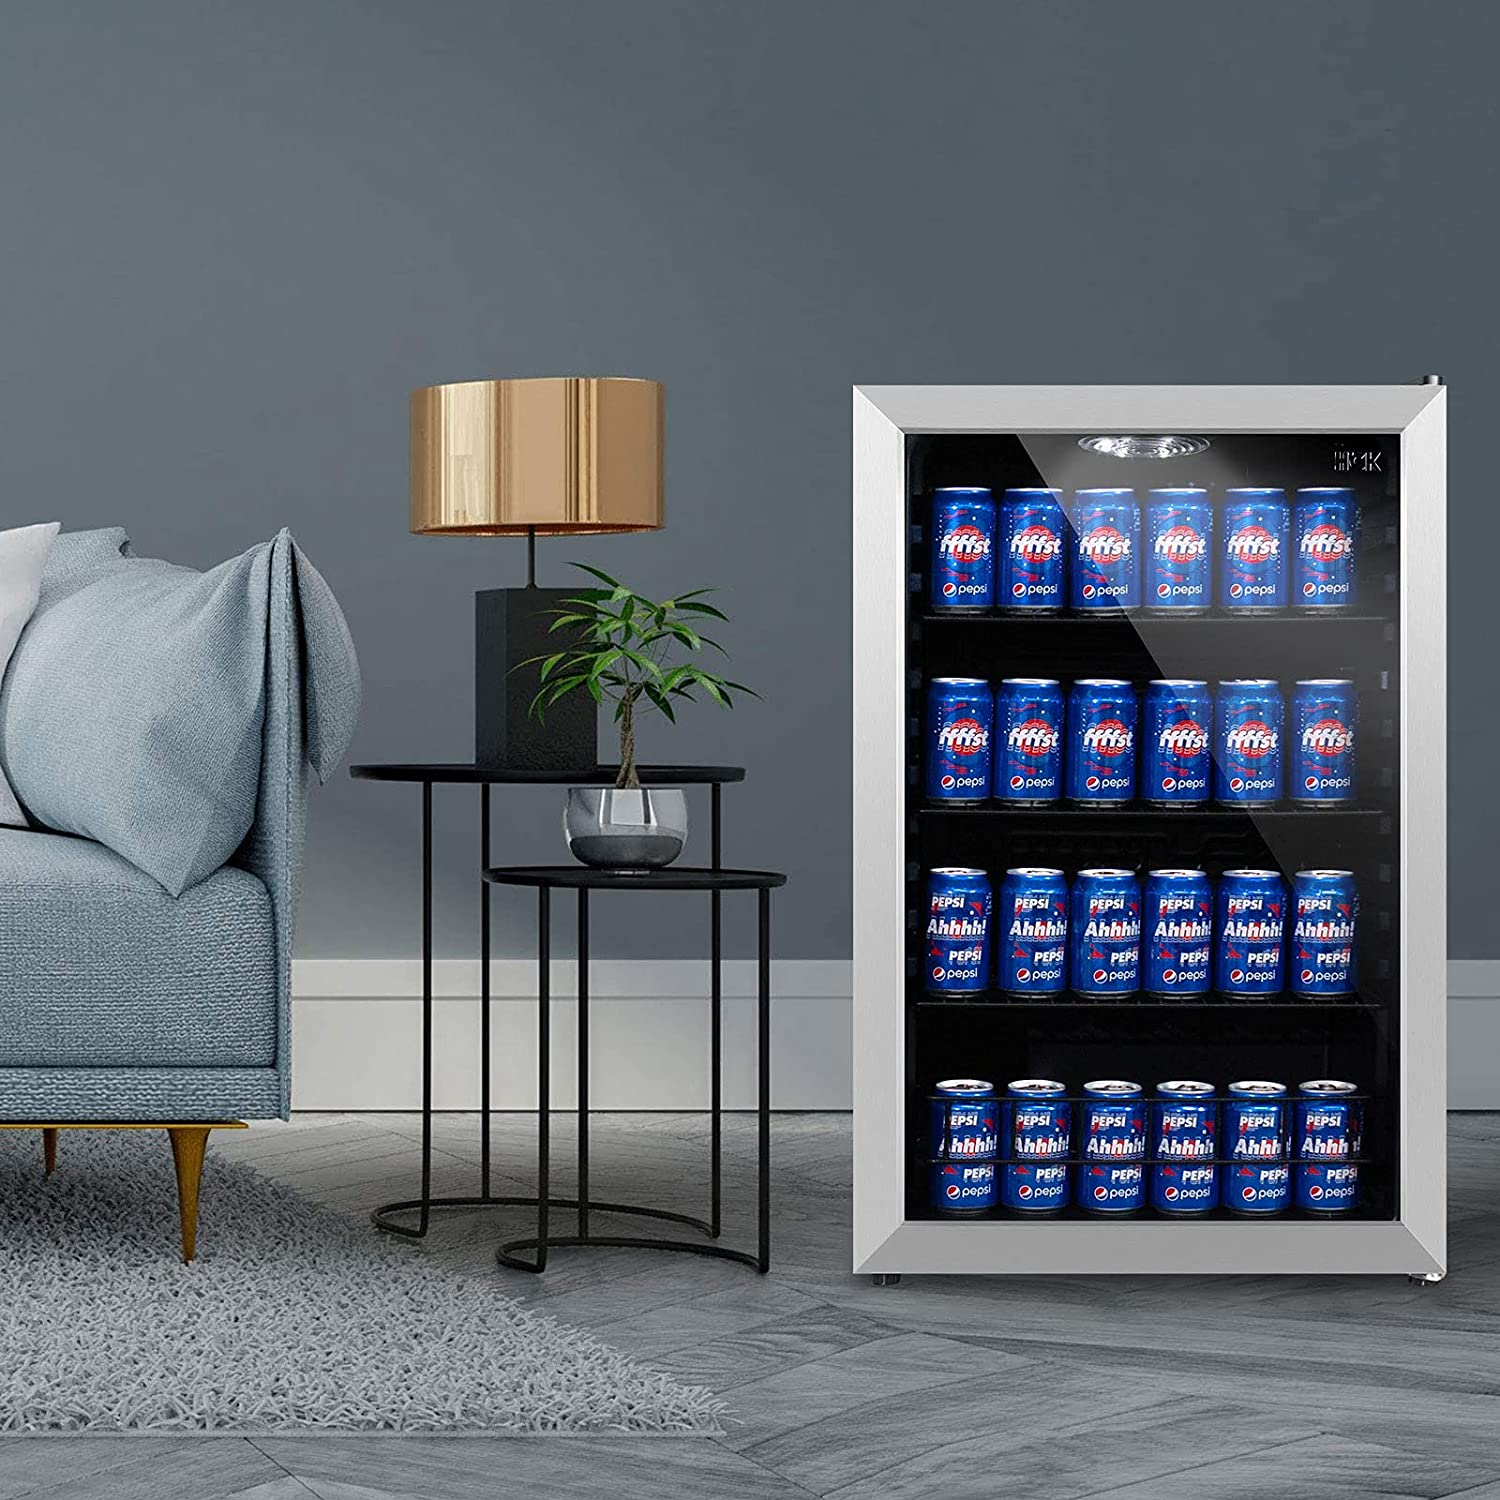 Does a Freestanding Beverage Refrigerator Use a Lot of Electricity?